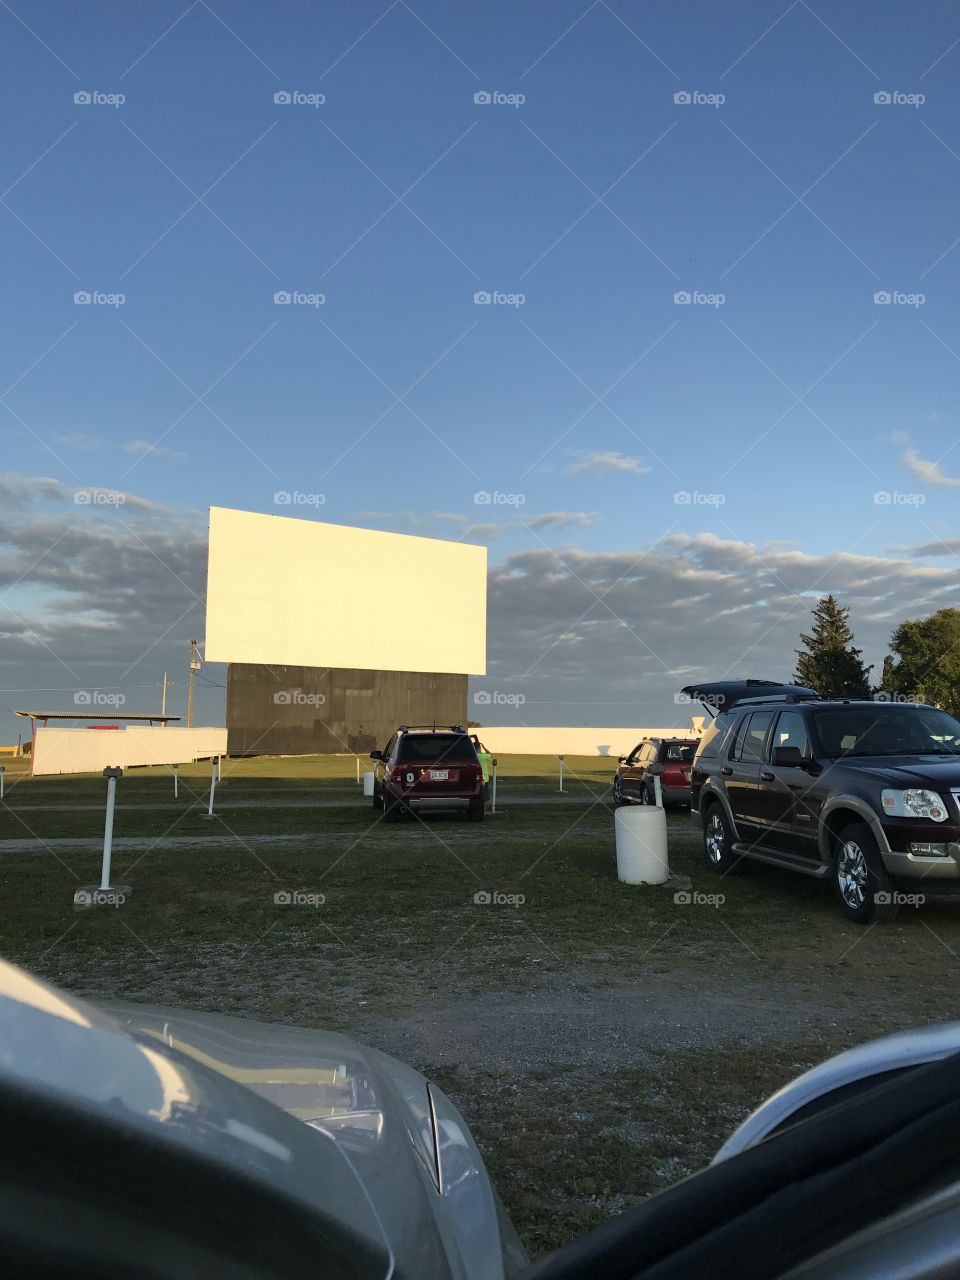 Drive in movie theater in rural Ohio 